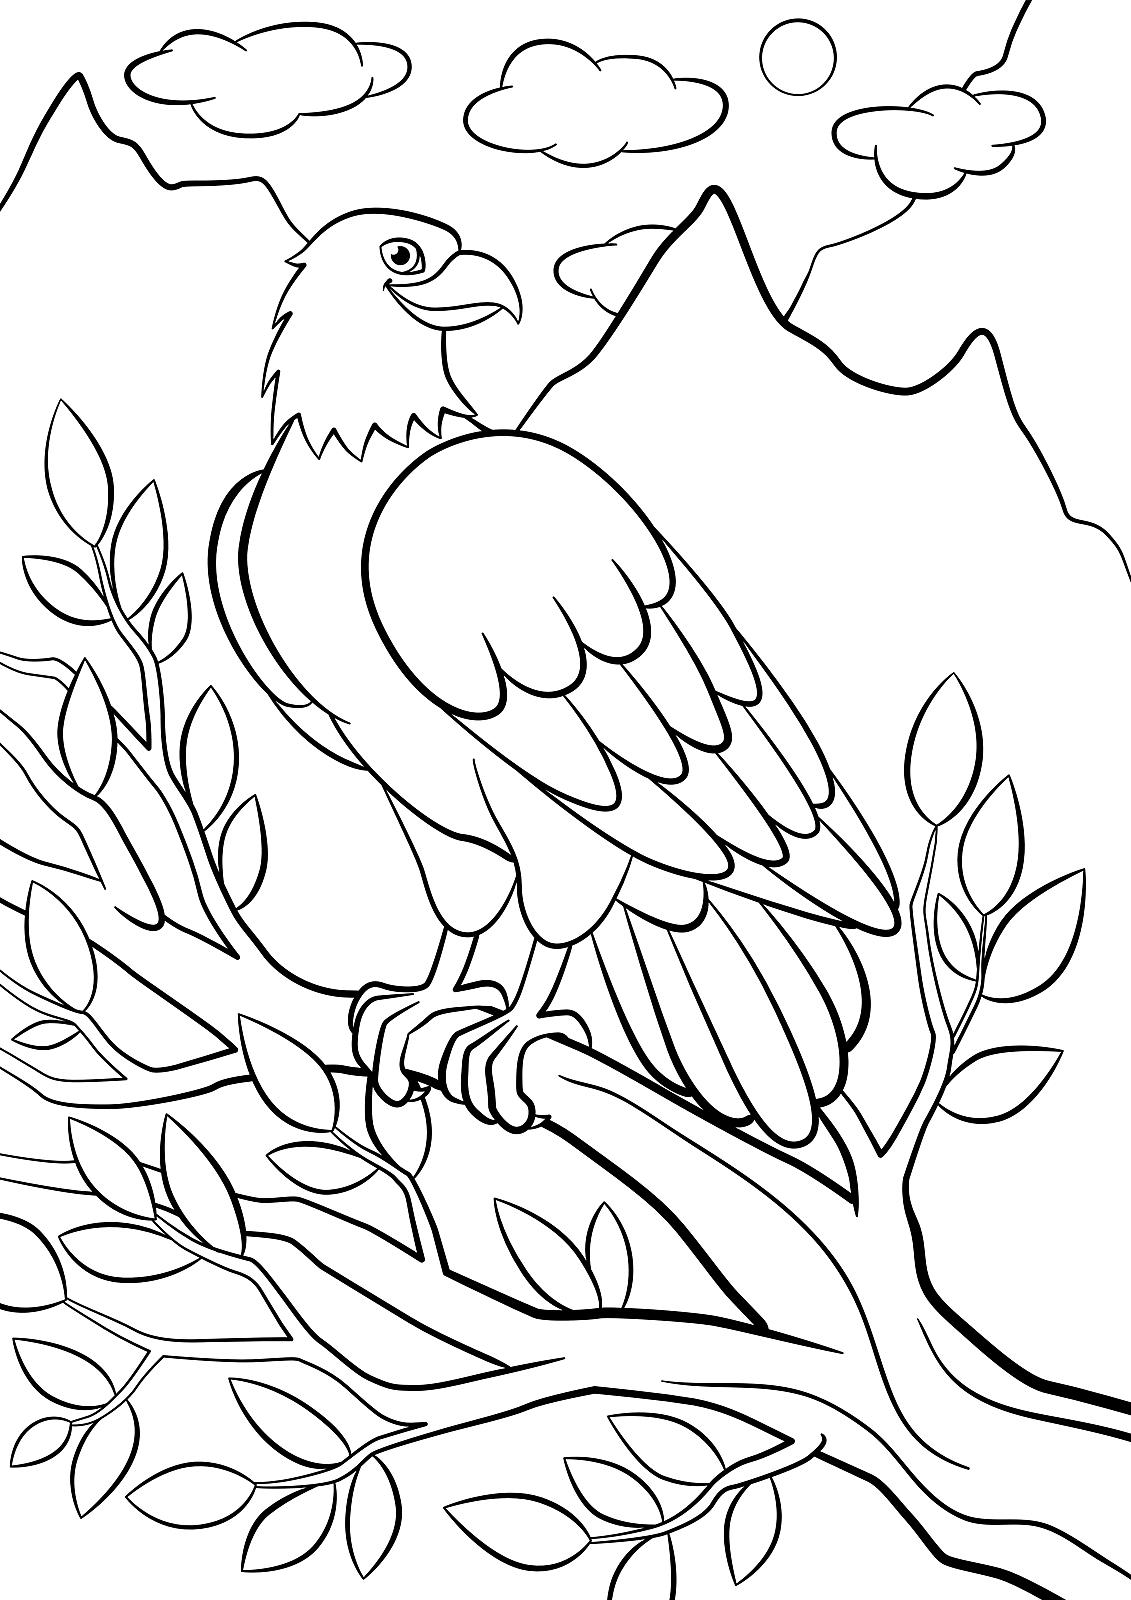 Bird coloring pages free fun printable coloring pages of our fine feathered friends printables mom